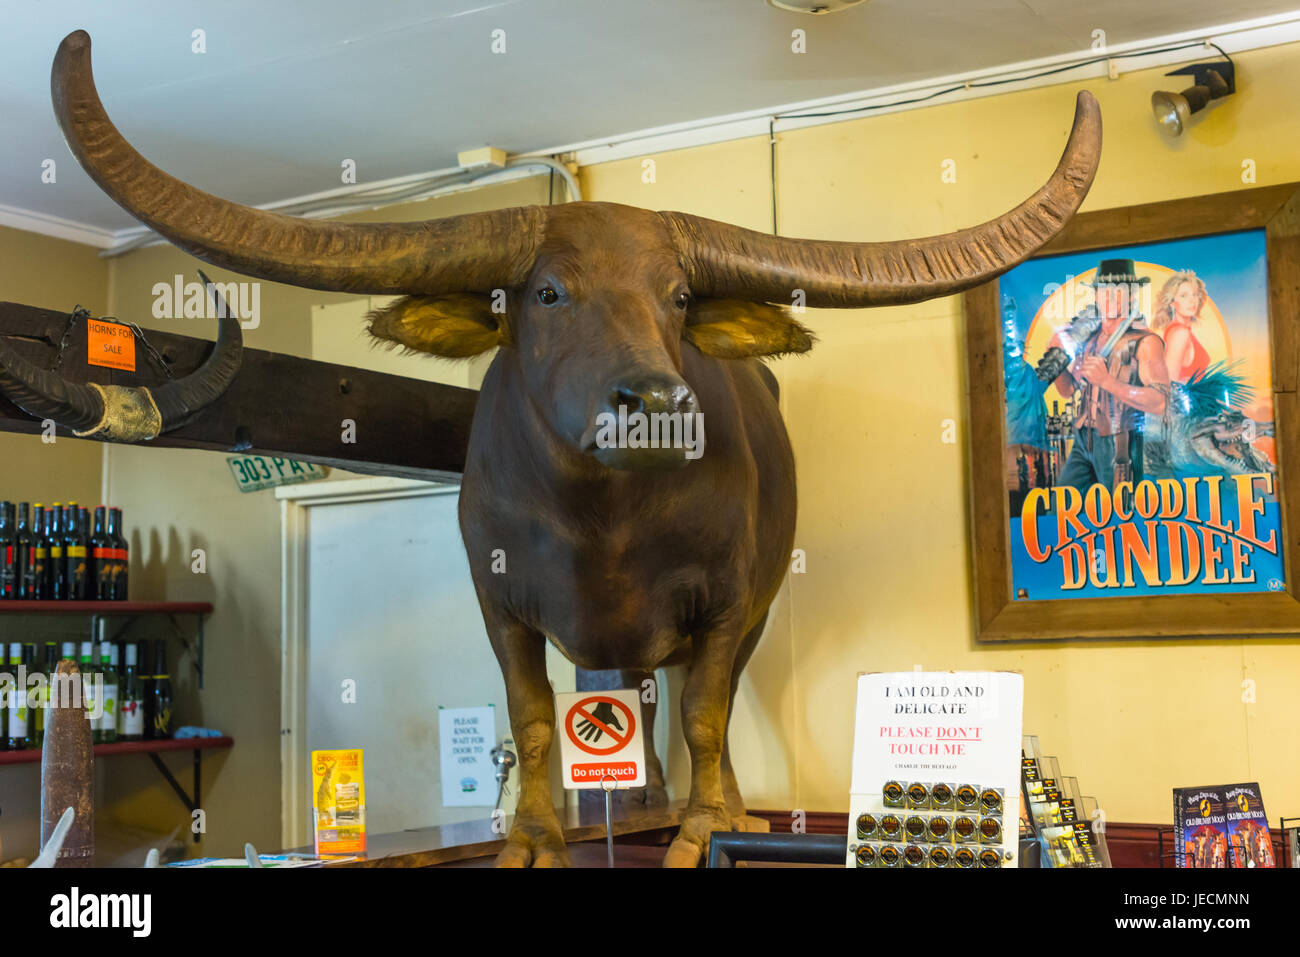 Charlie the Buffalo from the Film Crocodile Dundee, on display at Adeliade River Inn pub, Northern Territory, Australia Stock Photo